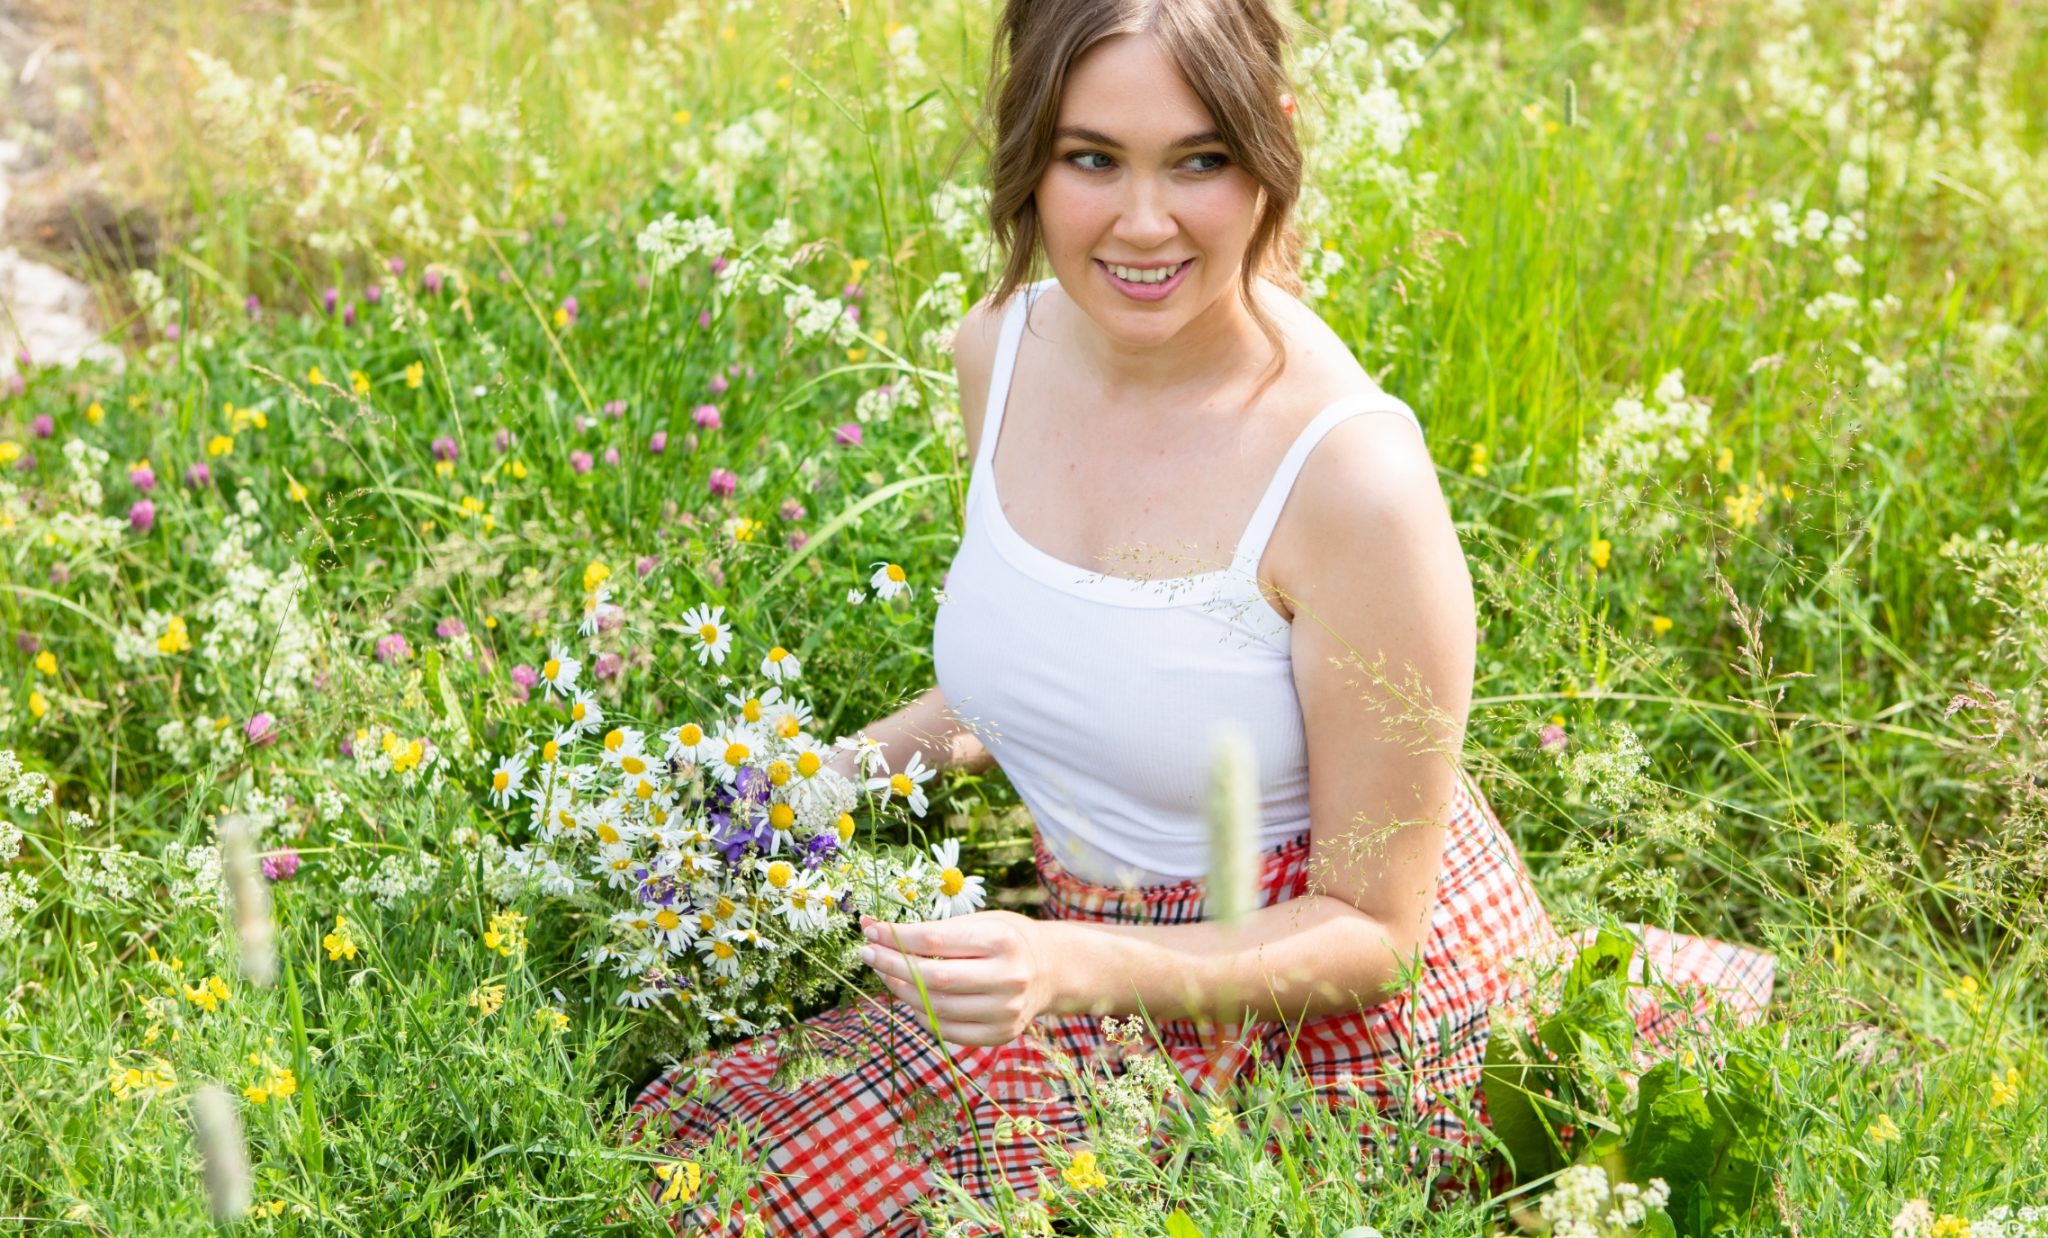 https://mozsweden.com/wp-content/uploads/2022/08/woman-picking-flowers-field-smiling-scaled.jpg